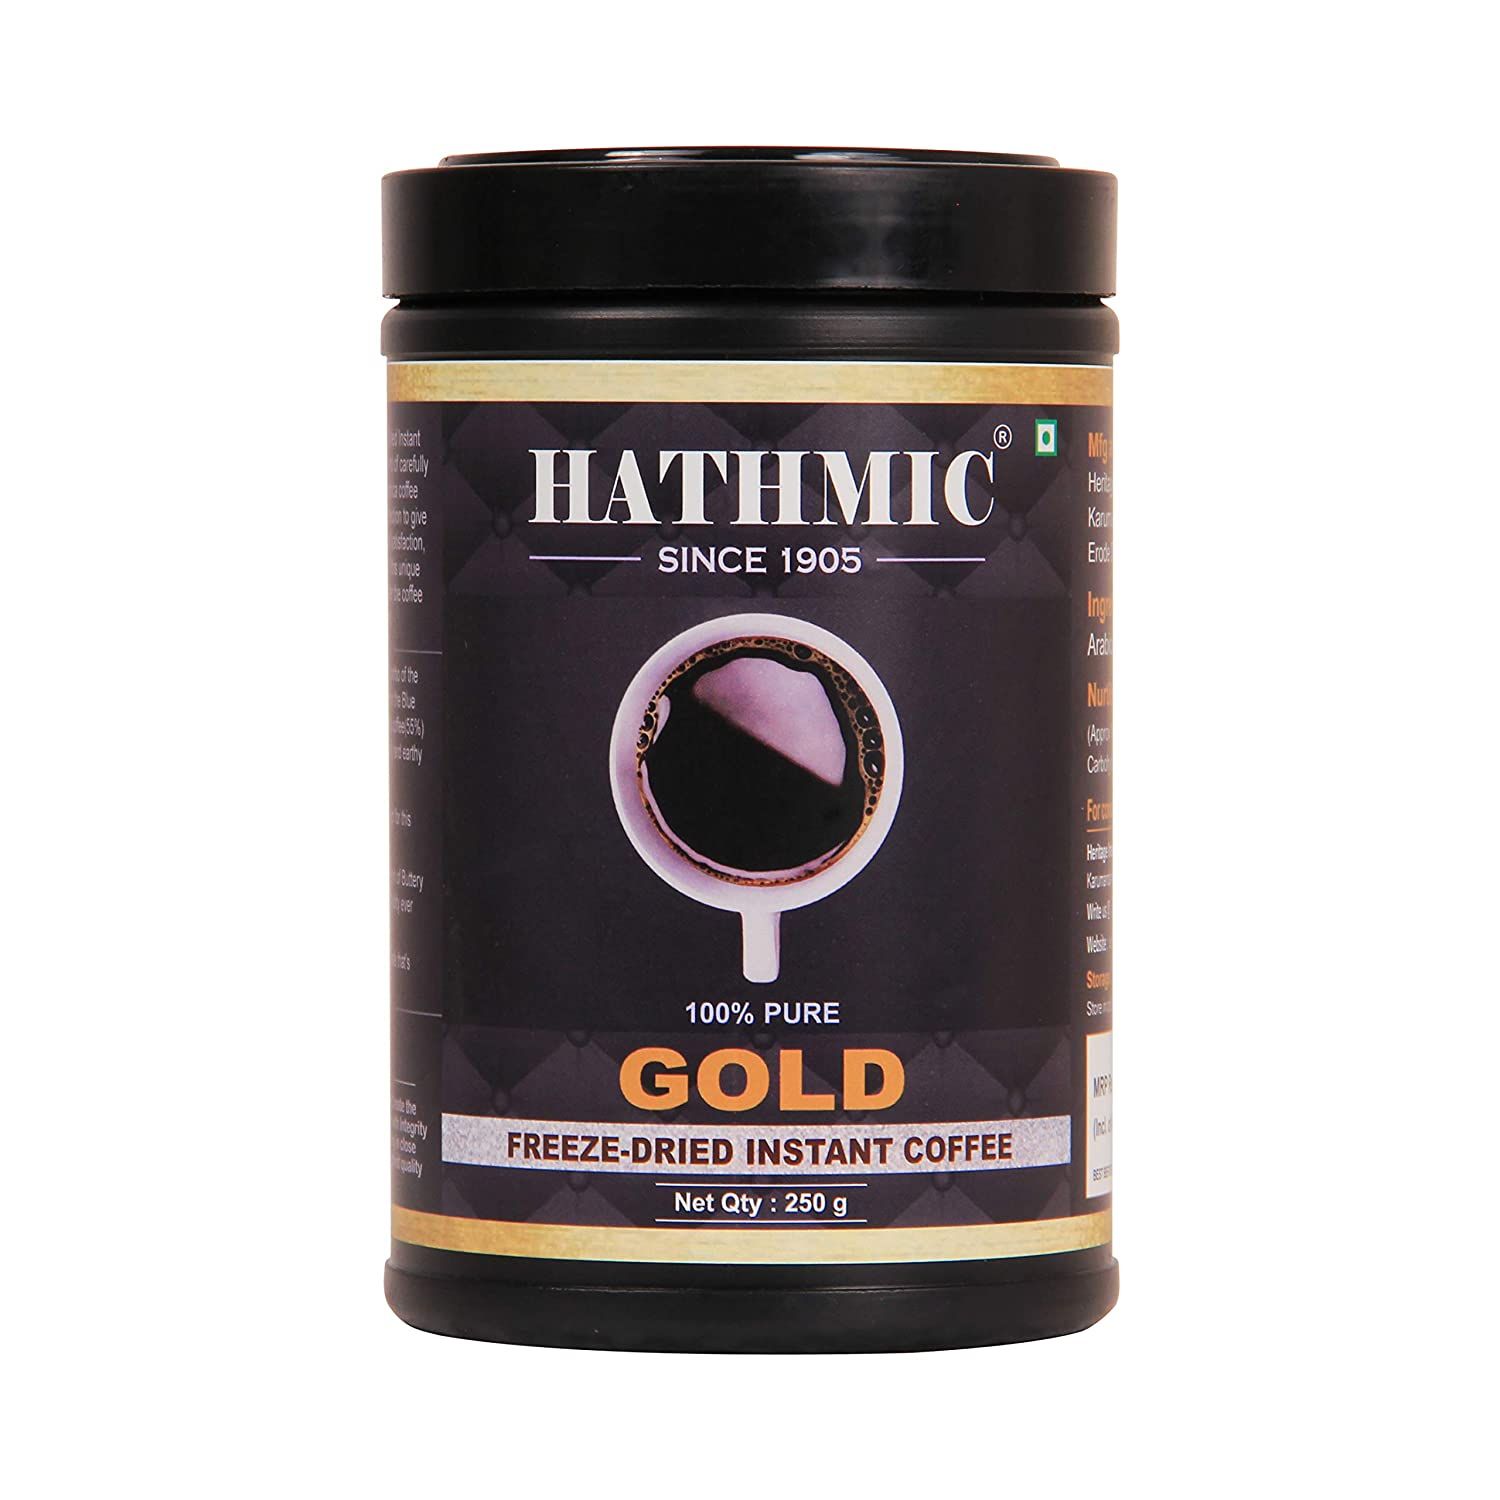 Hathmic Gold Freeze Dried Instant Coffee Image